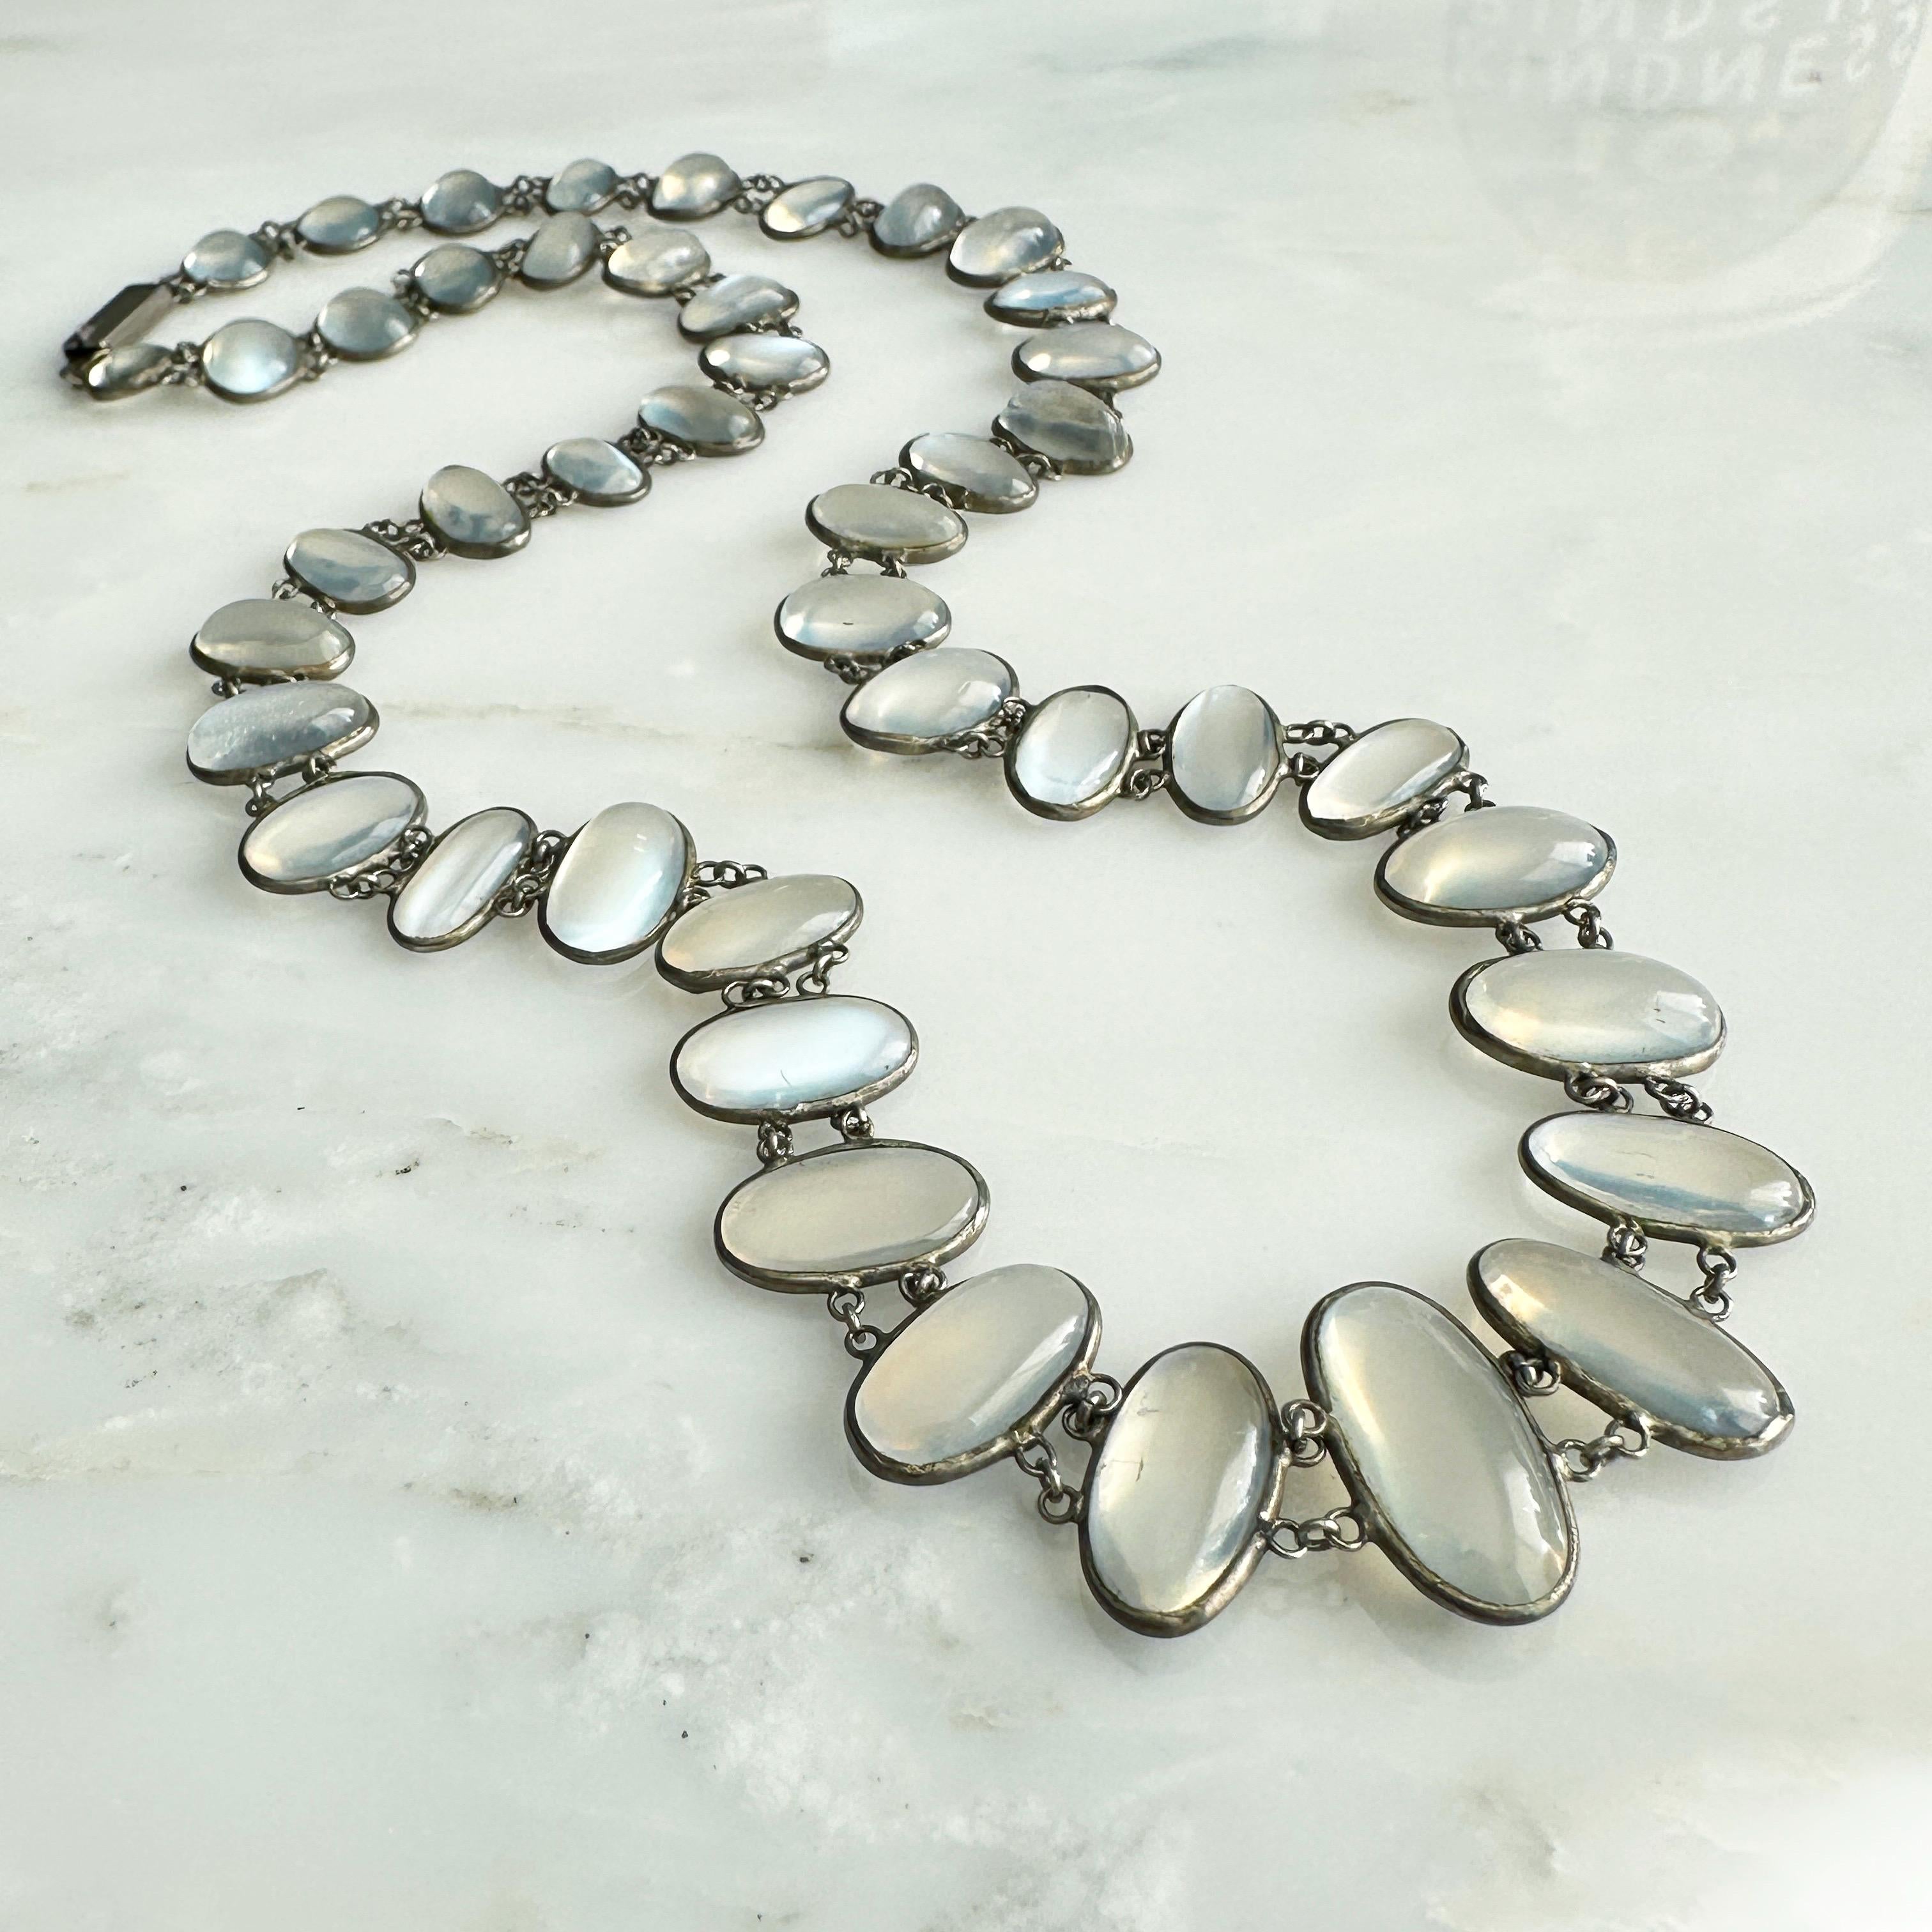 Details:
Full of antique charm! Sweet Edwardian Moonstone silver necklace, that drapes beautifully over your neck and collar bone. This lovely necklace has 45 graduated natural cabochon moonstones, linked with double linked silver chain and has a